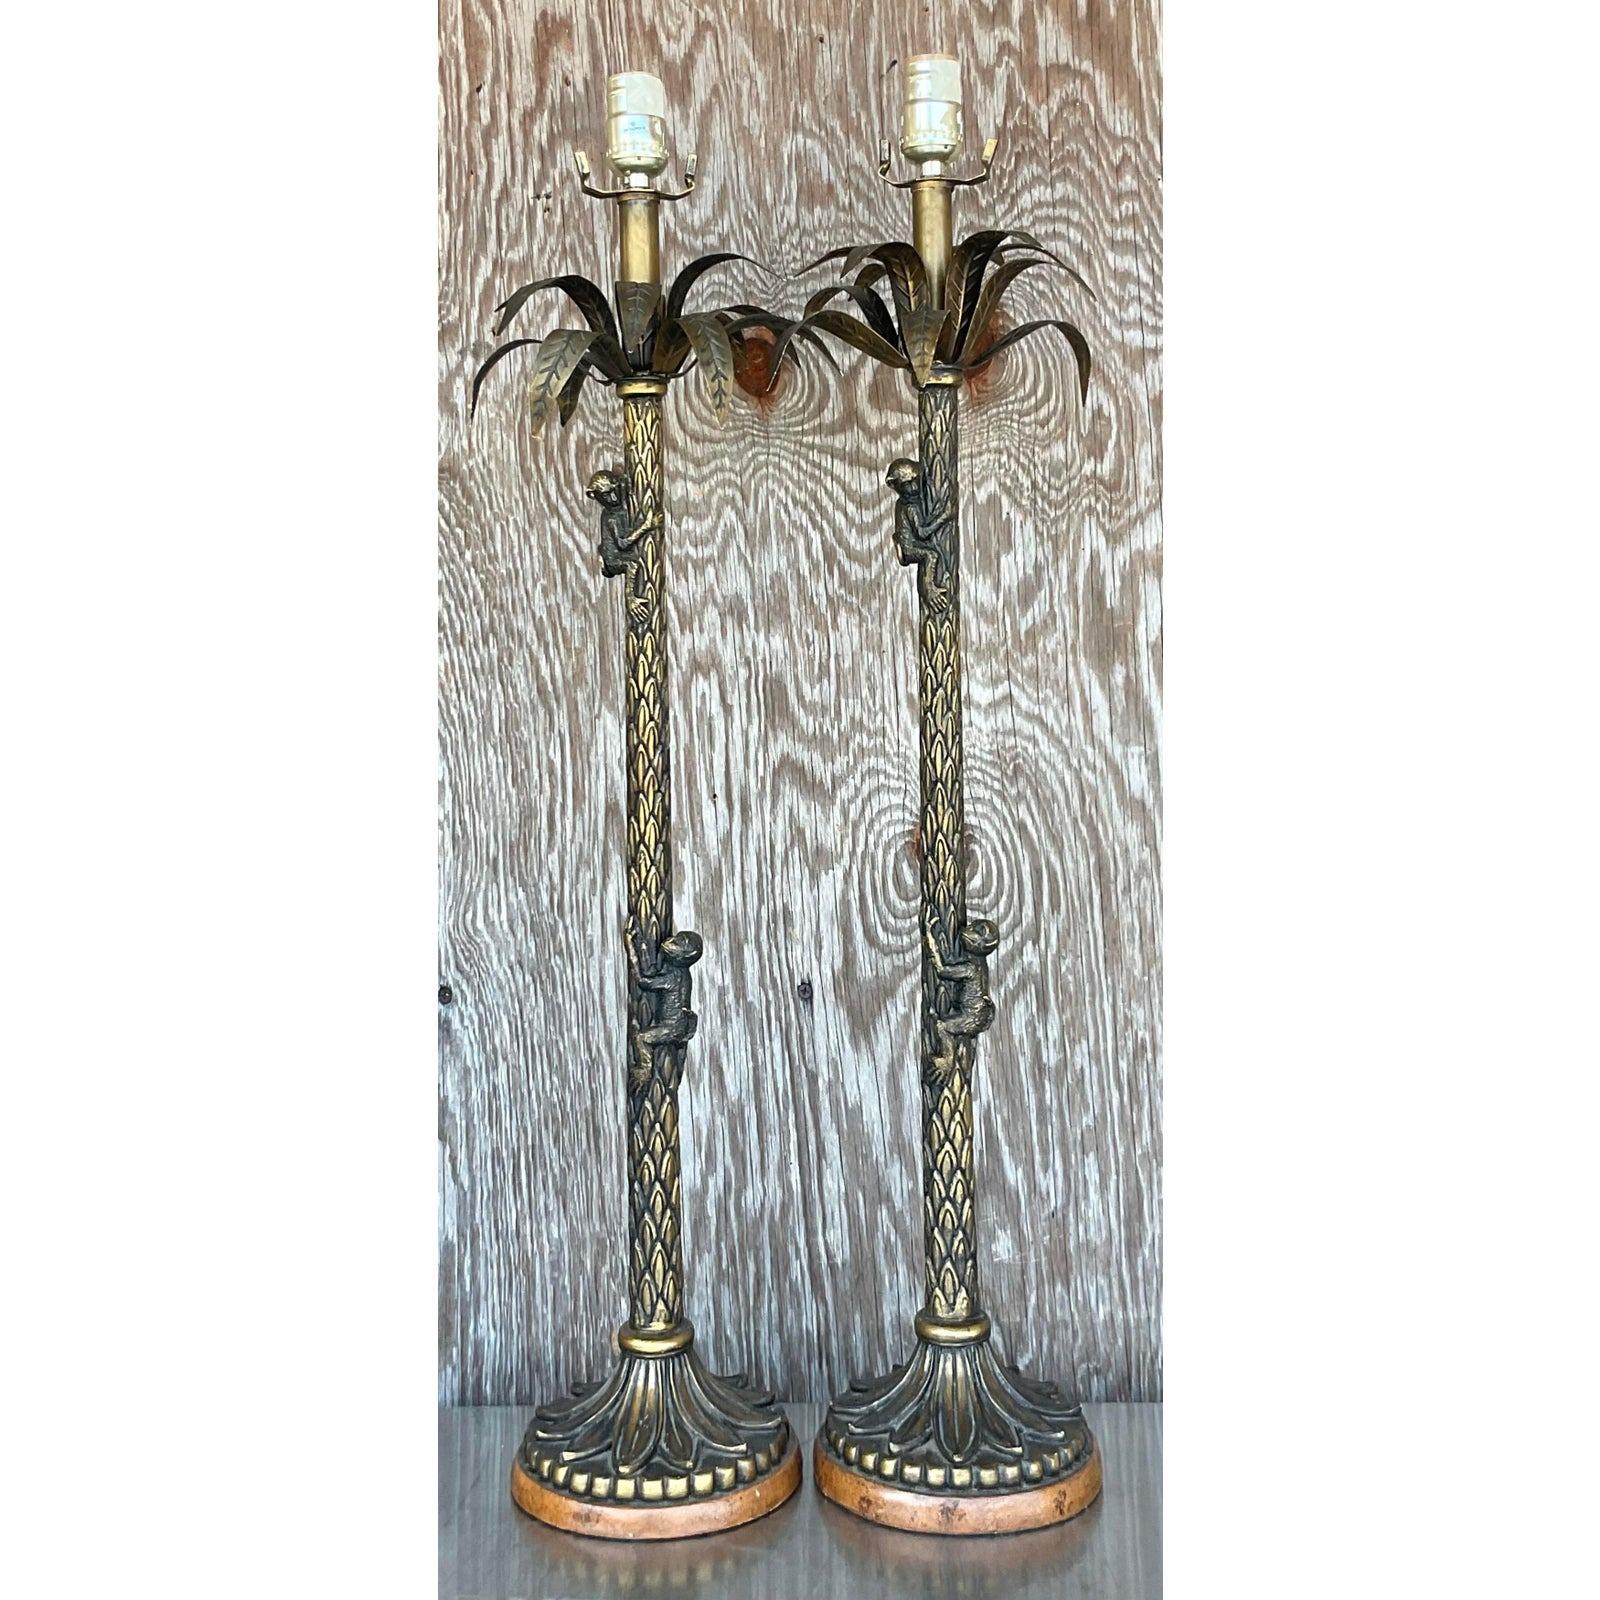 A gorgeous pair of vintage palm tree and monkey lamps that can add a touch of life to any coastal décor. Acquired at a Palm Beach estate.

The lamps are in great vintage condition. Minor scuffs and blemishes due to age and use.

The vendor has